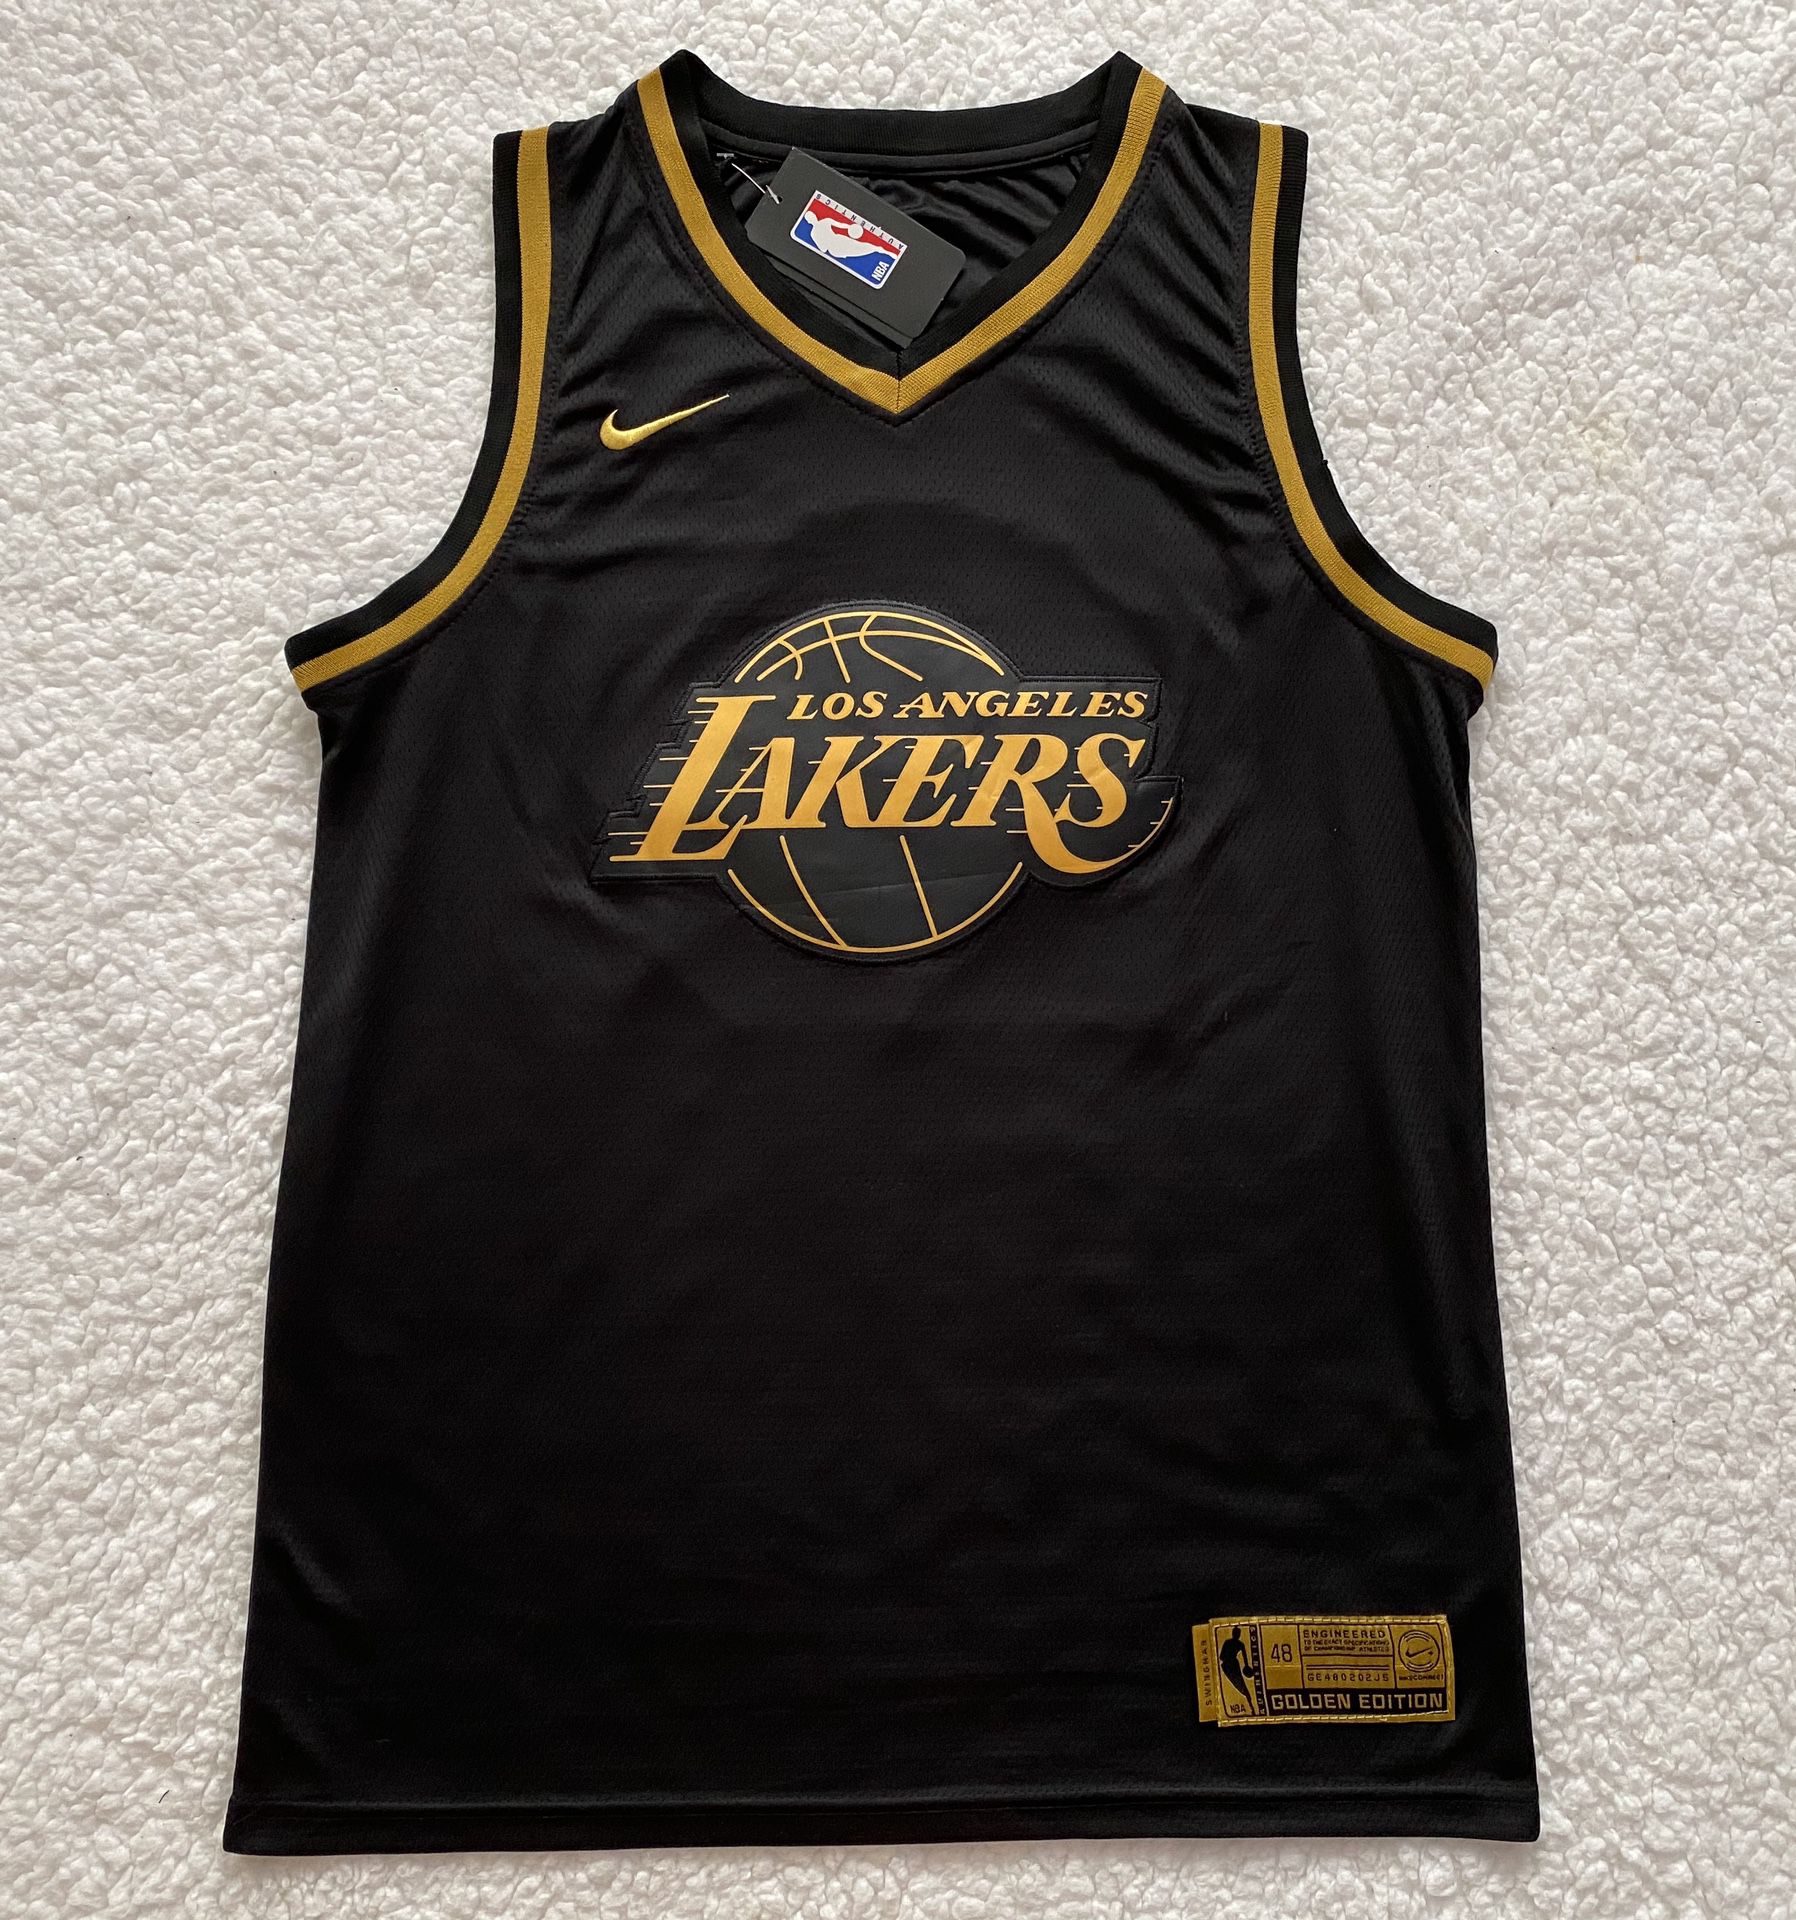 LeBron James Los Angeles Lakers NBA Jersey - Brand New - Never Used - Men’s - Nike Golden Edition Black Basketball Jersey - Size M and L